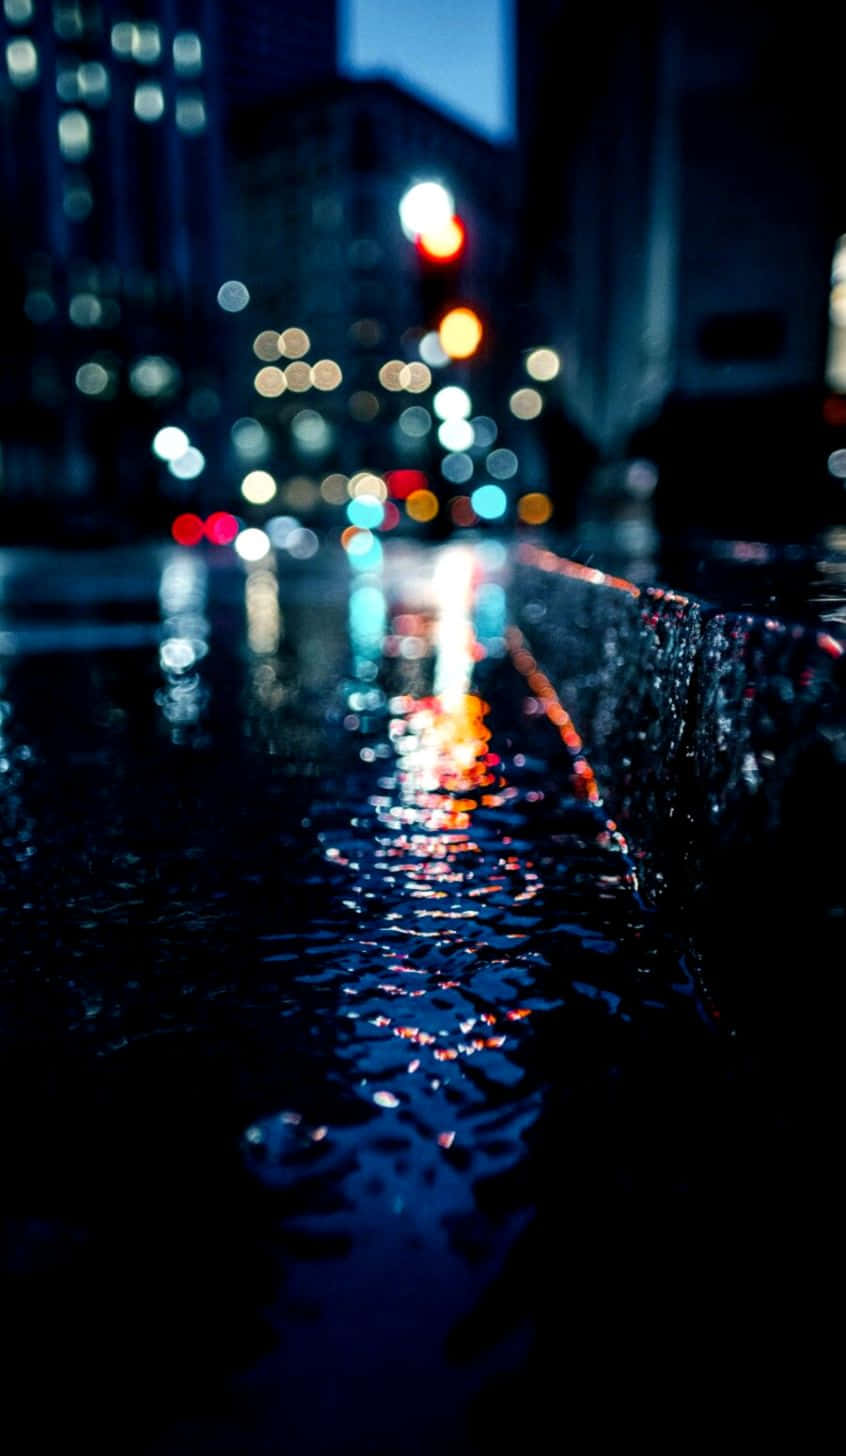 A vibrant display of city lights reflected in rain-soaked streets at night. Wallpaper